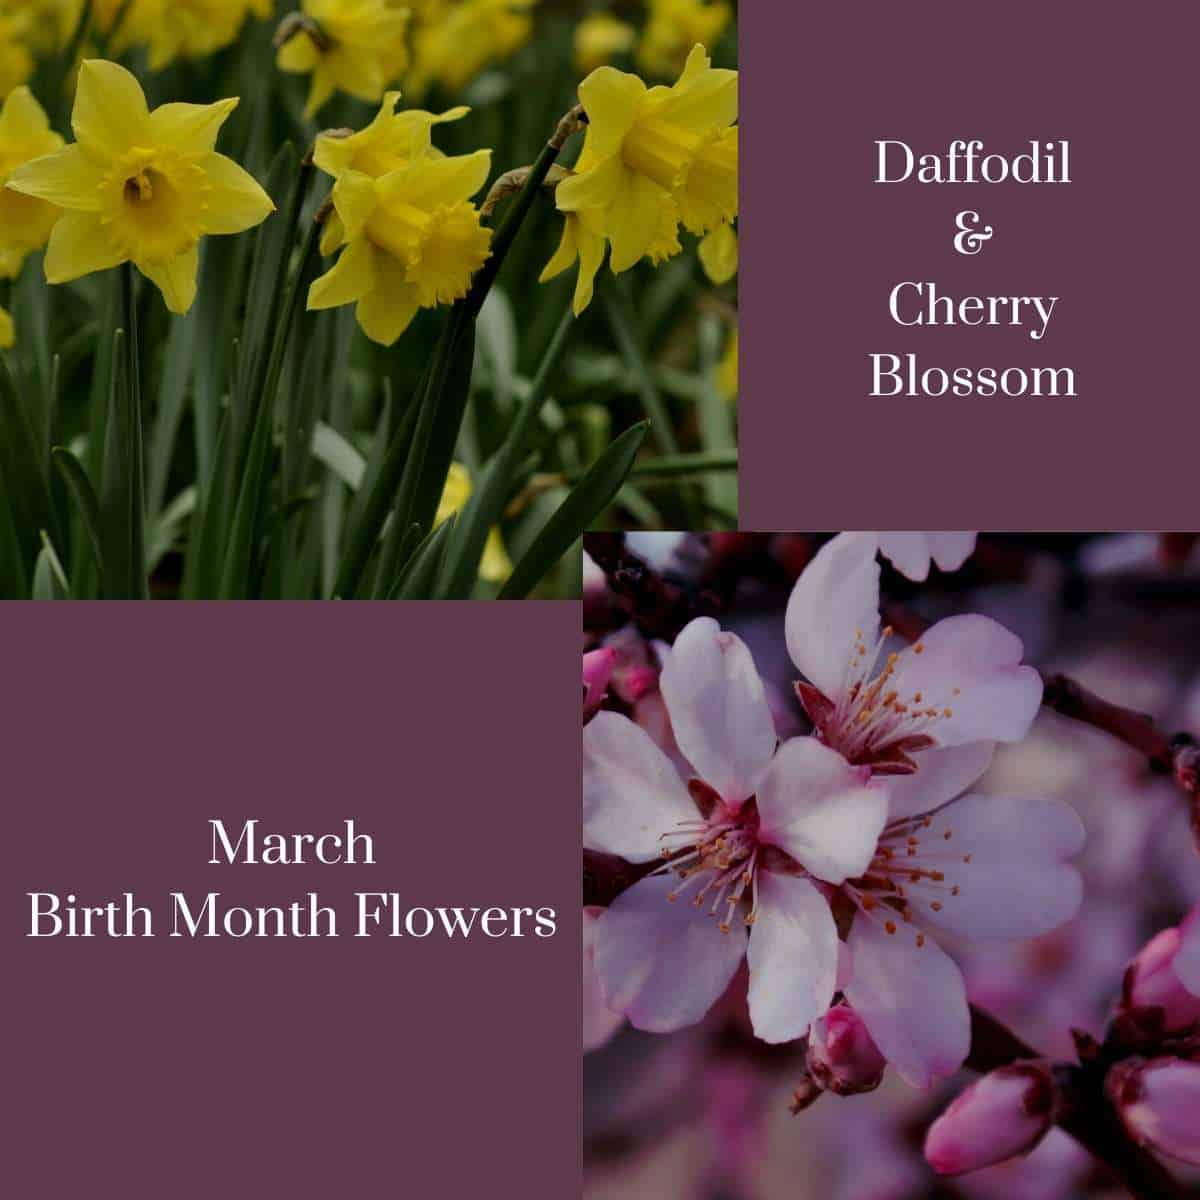 march birth flowers cherry blossoms and daffodils labelled with text